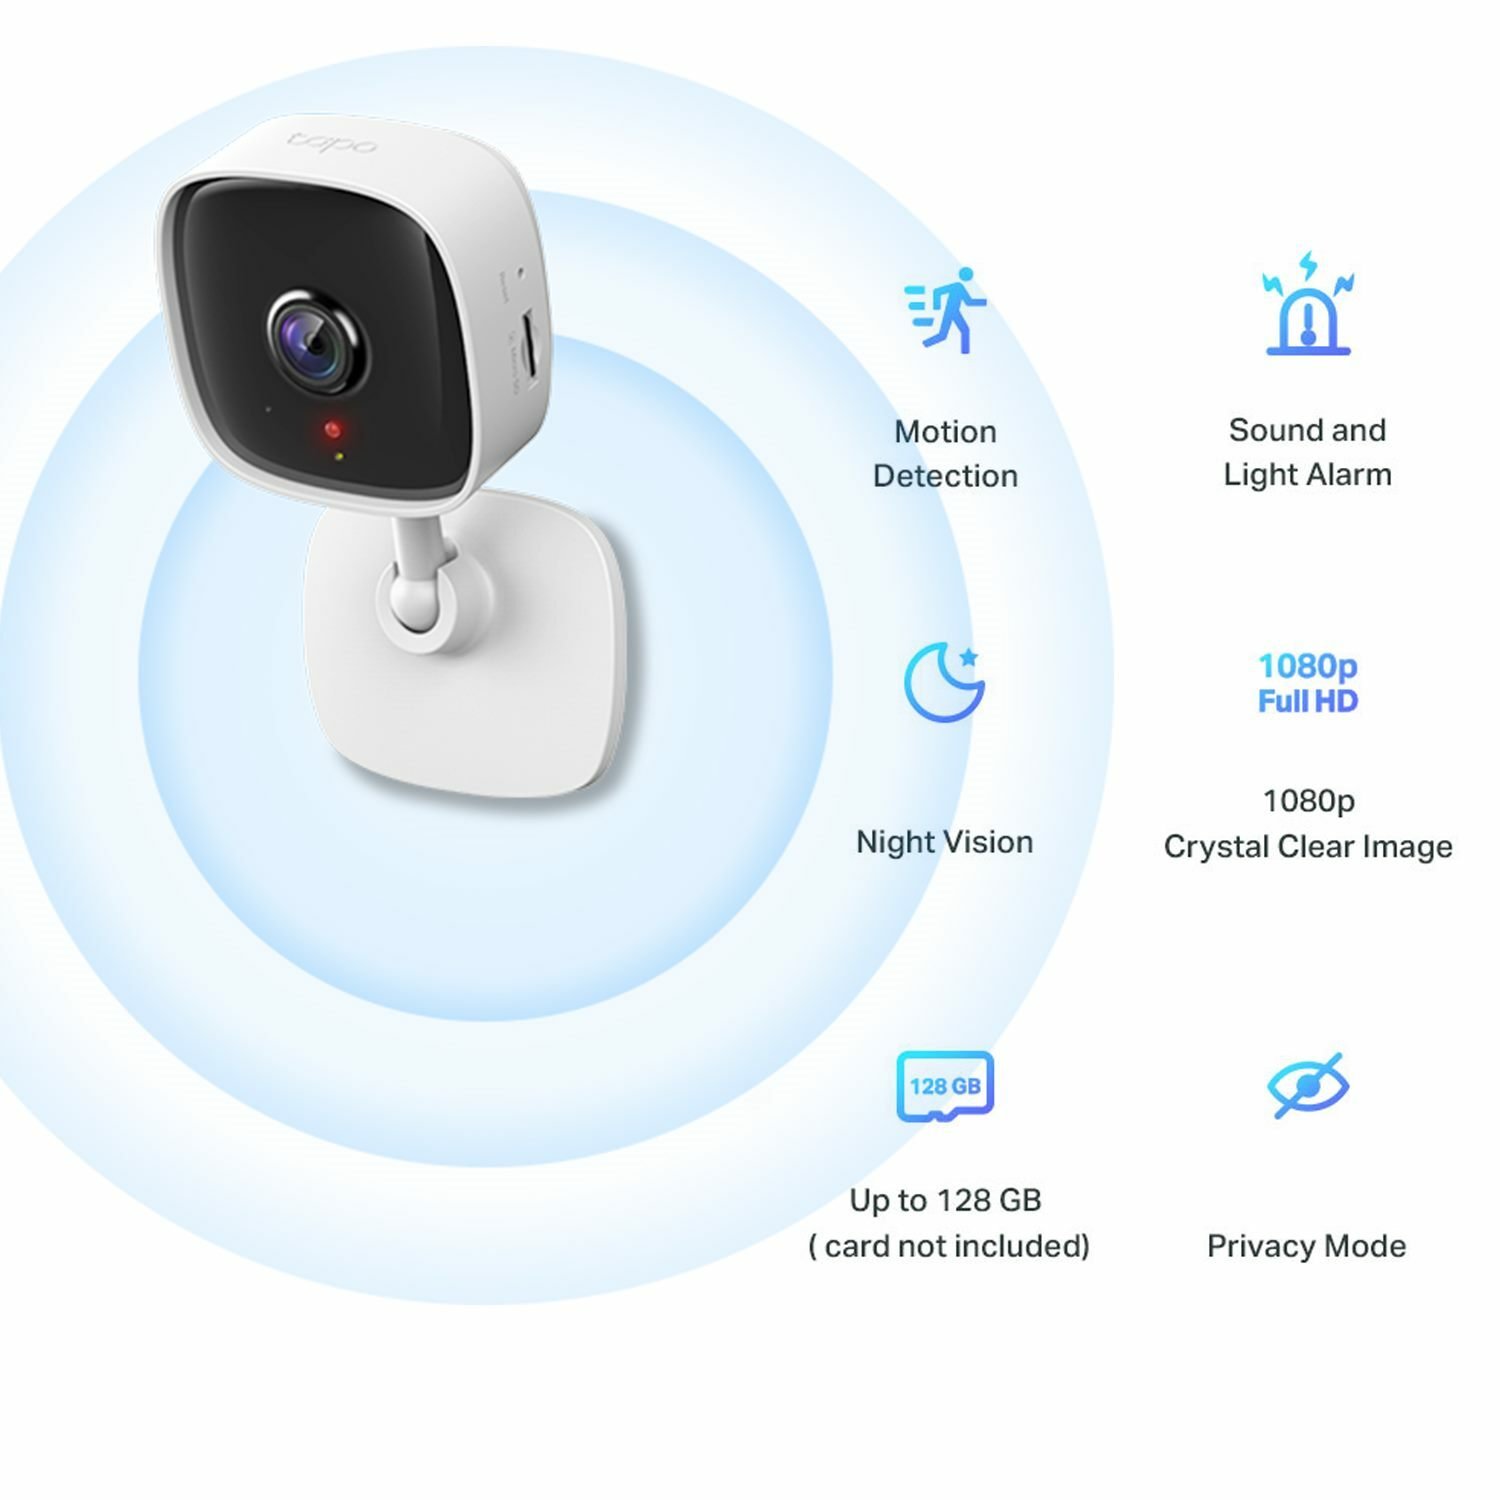 TP-Link Tapo C100 Smart 1080p Wi-Fi Indoor Camera Review